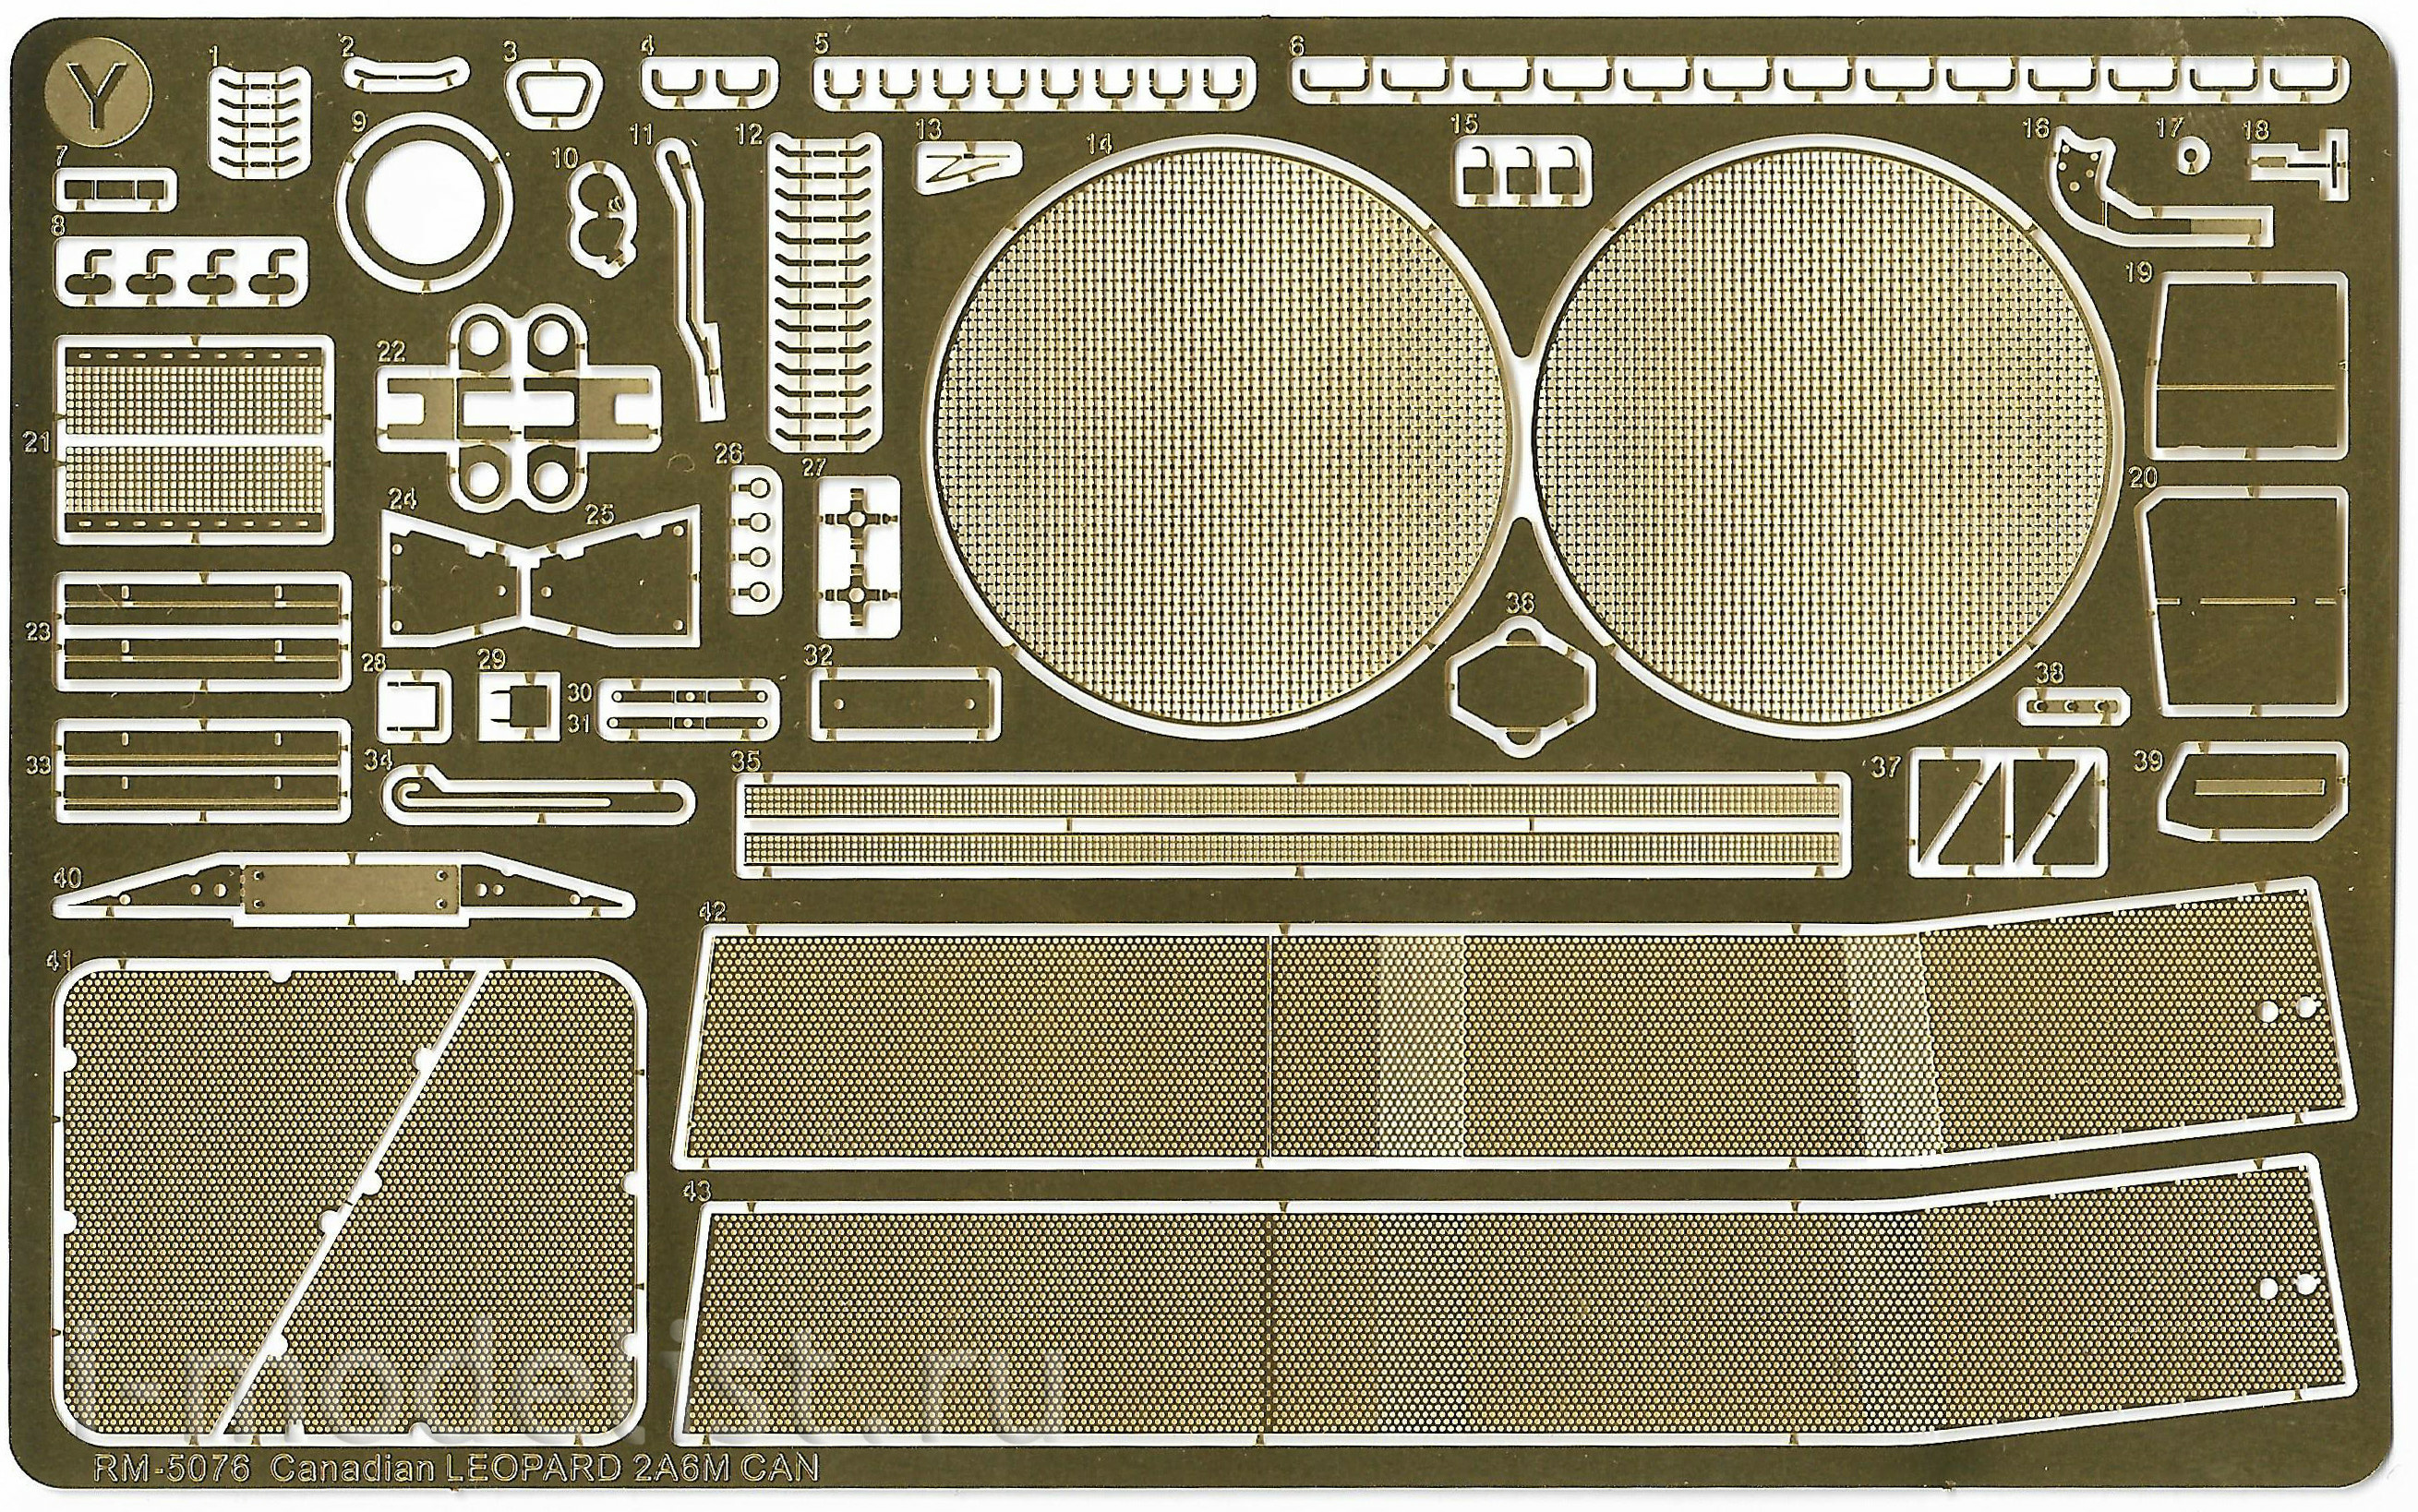 RM-5076 Rye Field Model 1/35 Canadian Leopard 2A6M CAN with working tracks